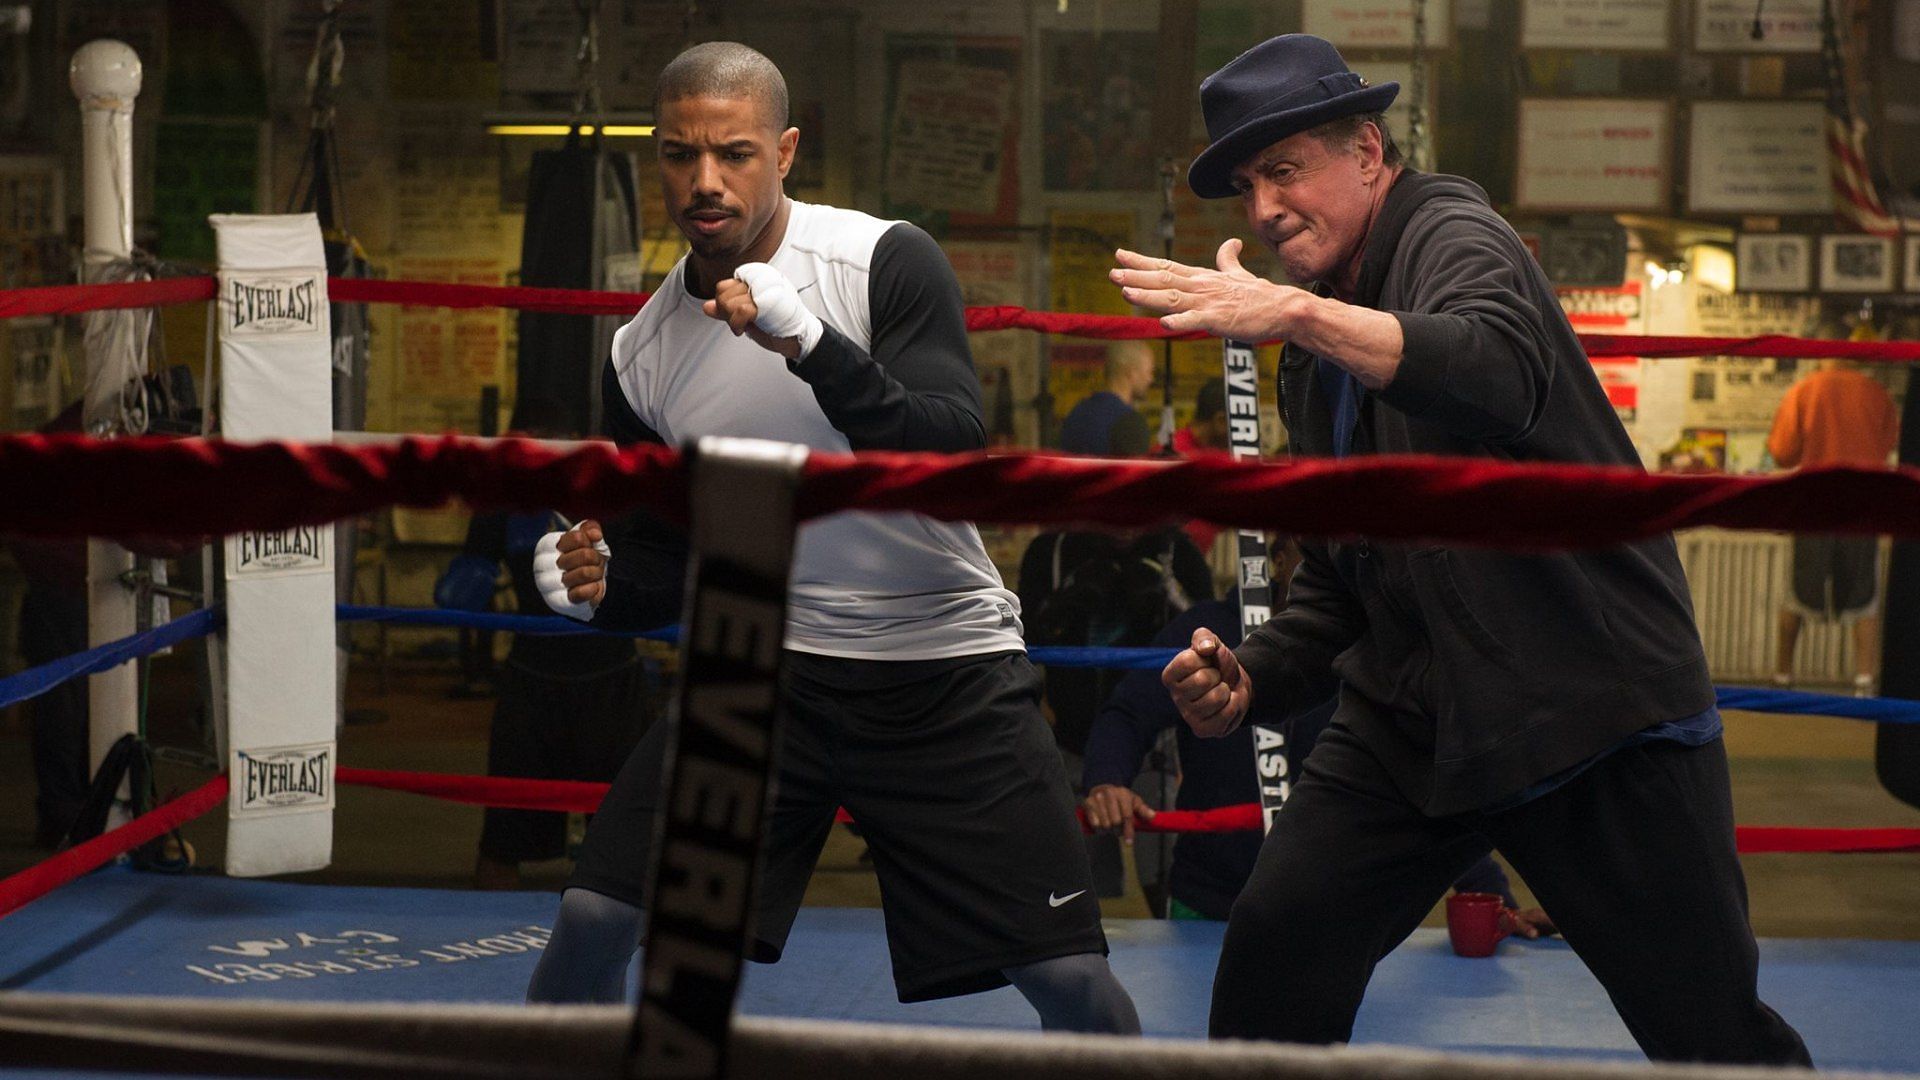 Michael B. Jordan and Sylvester Stallone in a scene from the film (Image via Facebook/Creed)